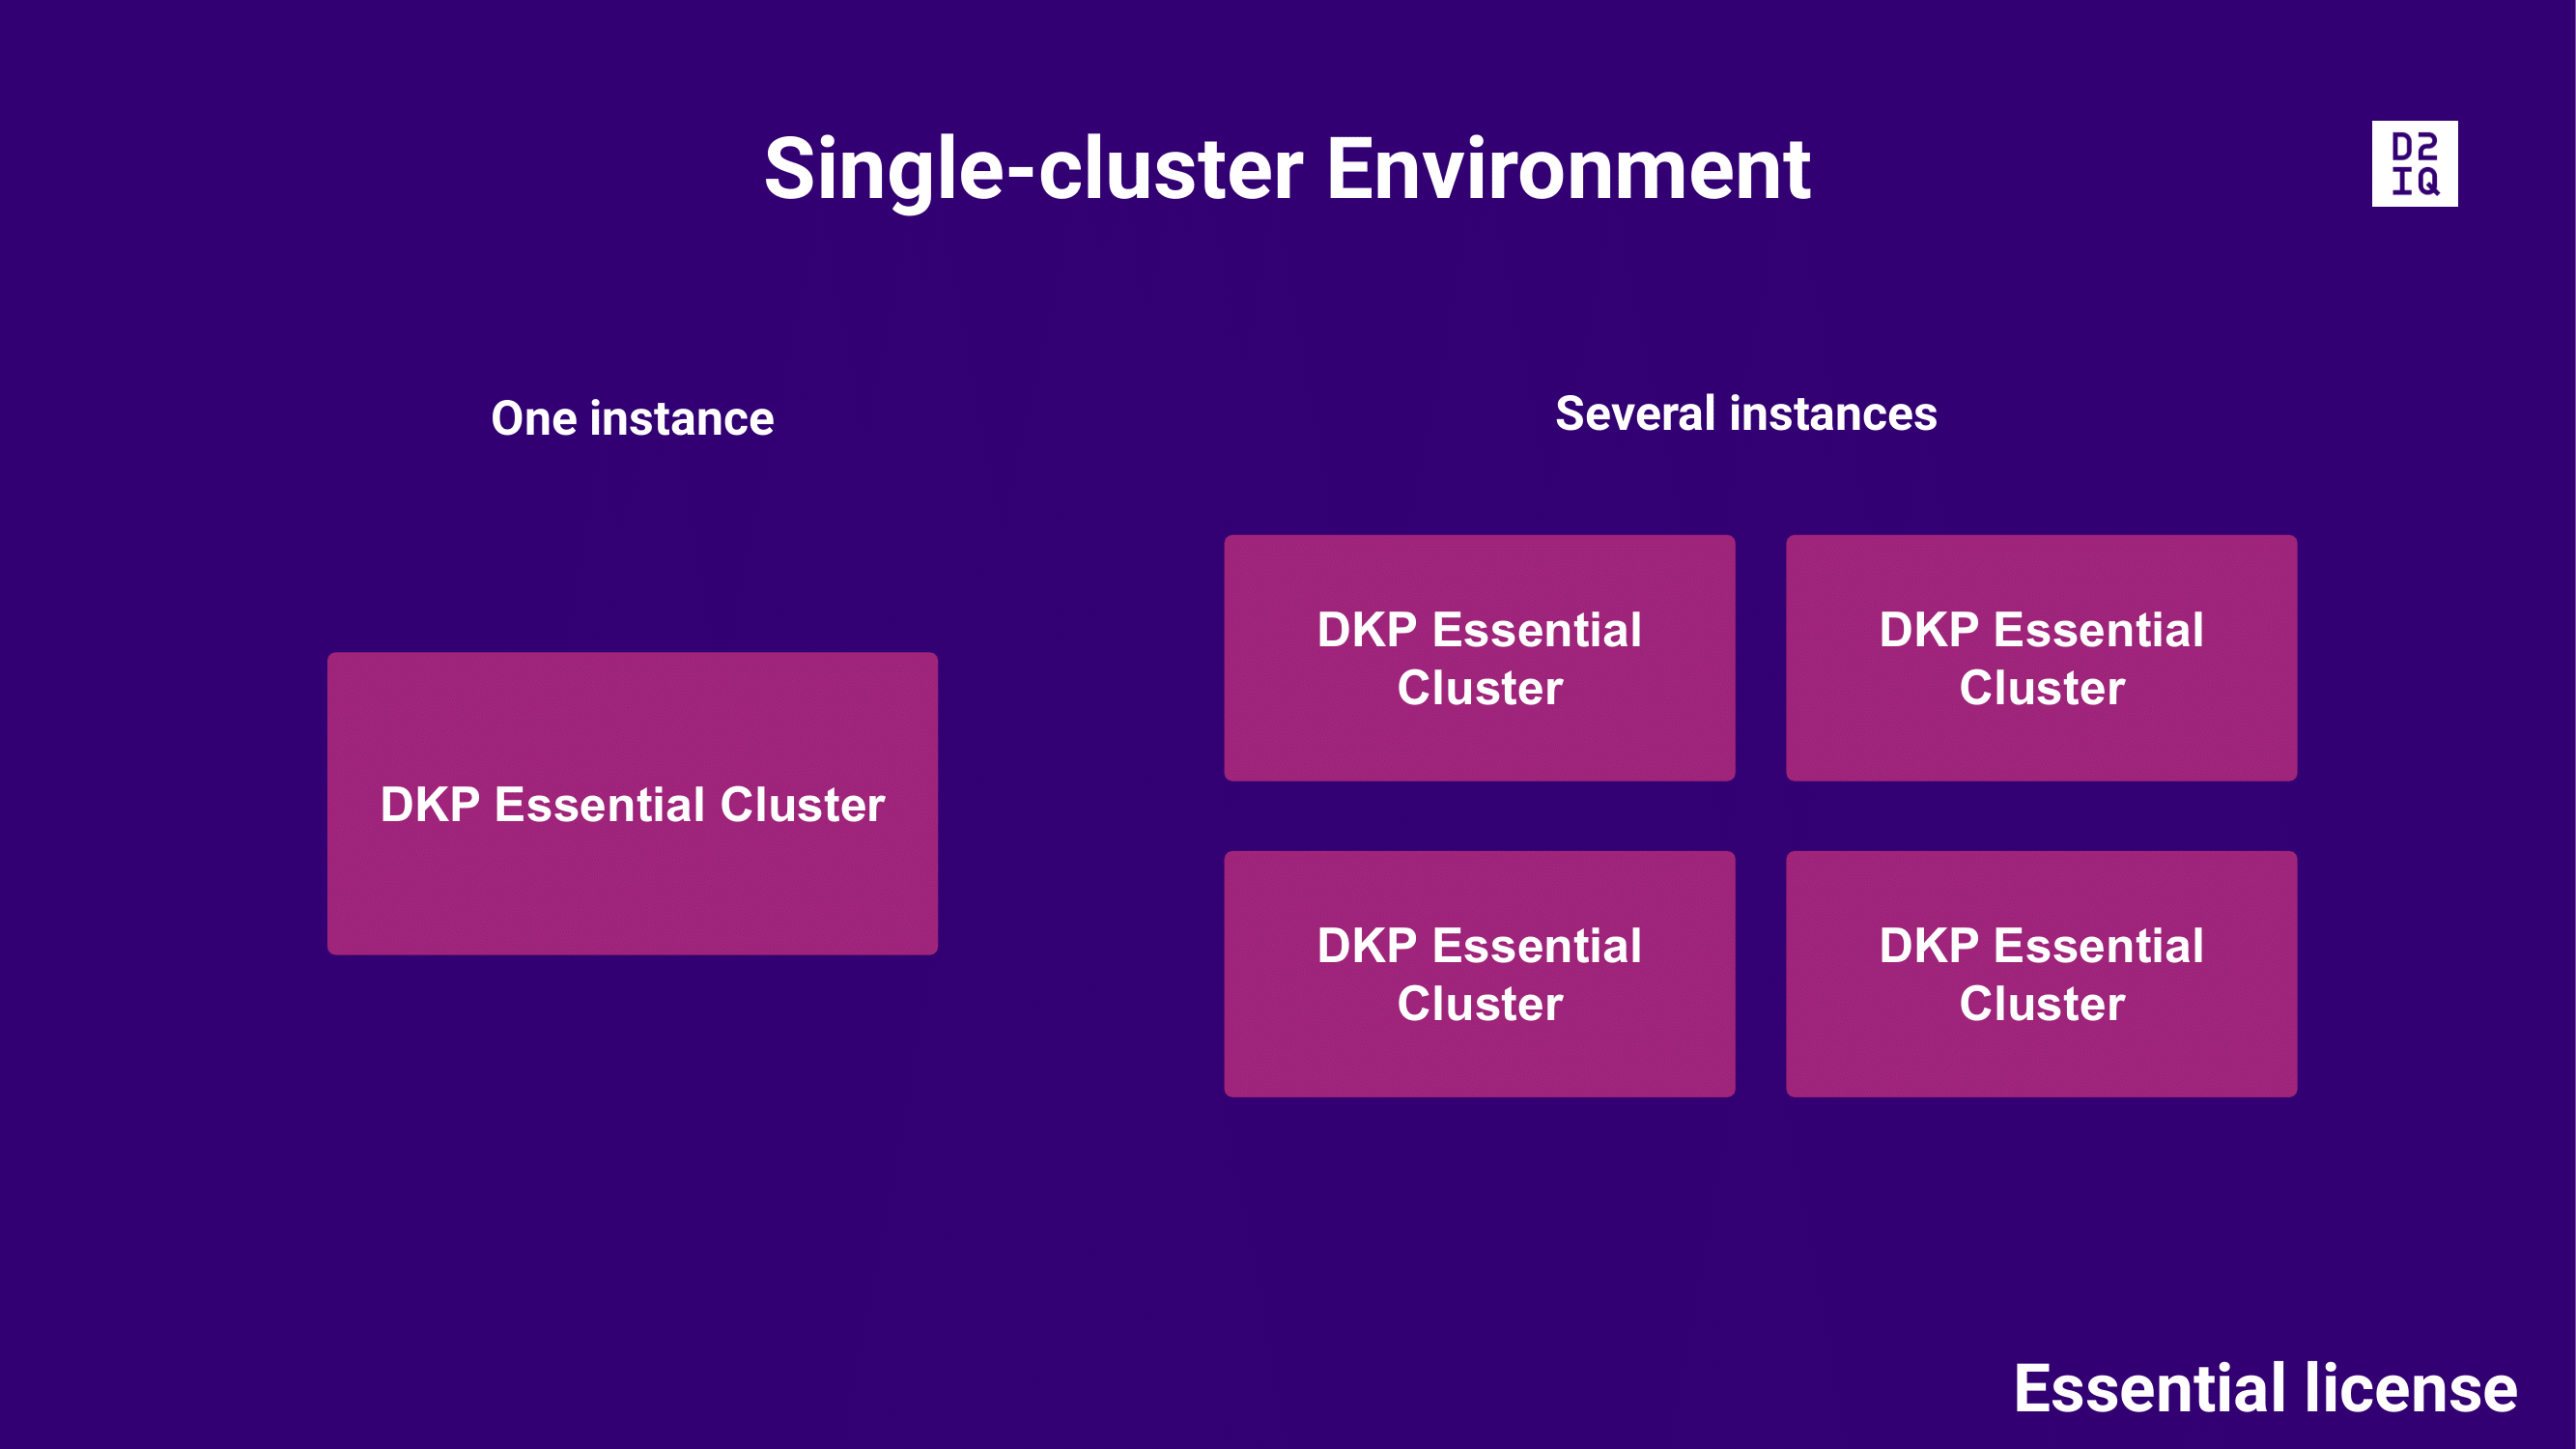 In a single cluster environment you can have a single DKP Essential cluster, or several DKP Essential Clusters. In this case, all are separate from each other and are independent instances.